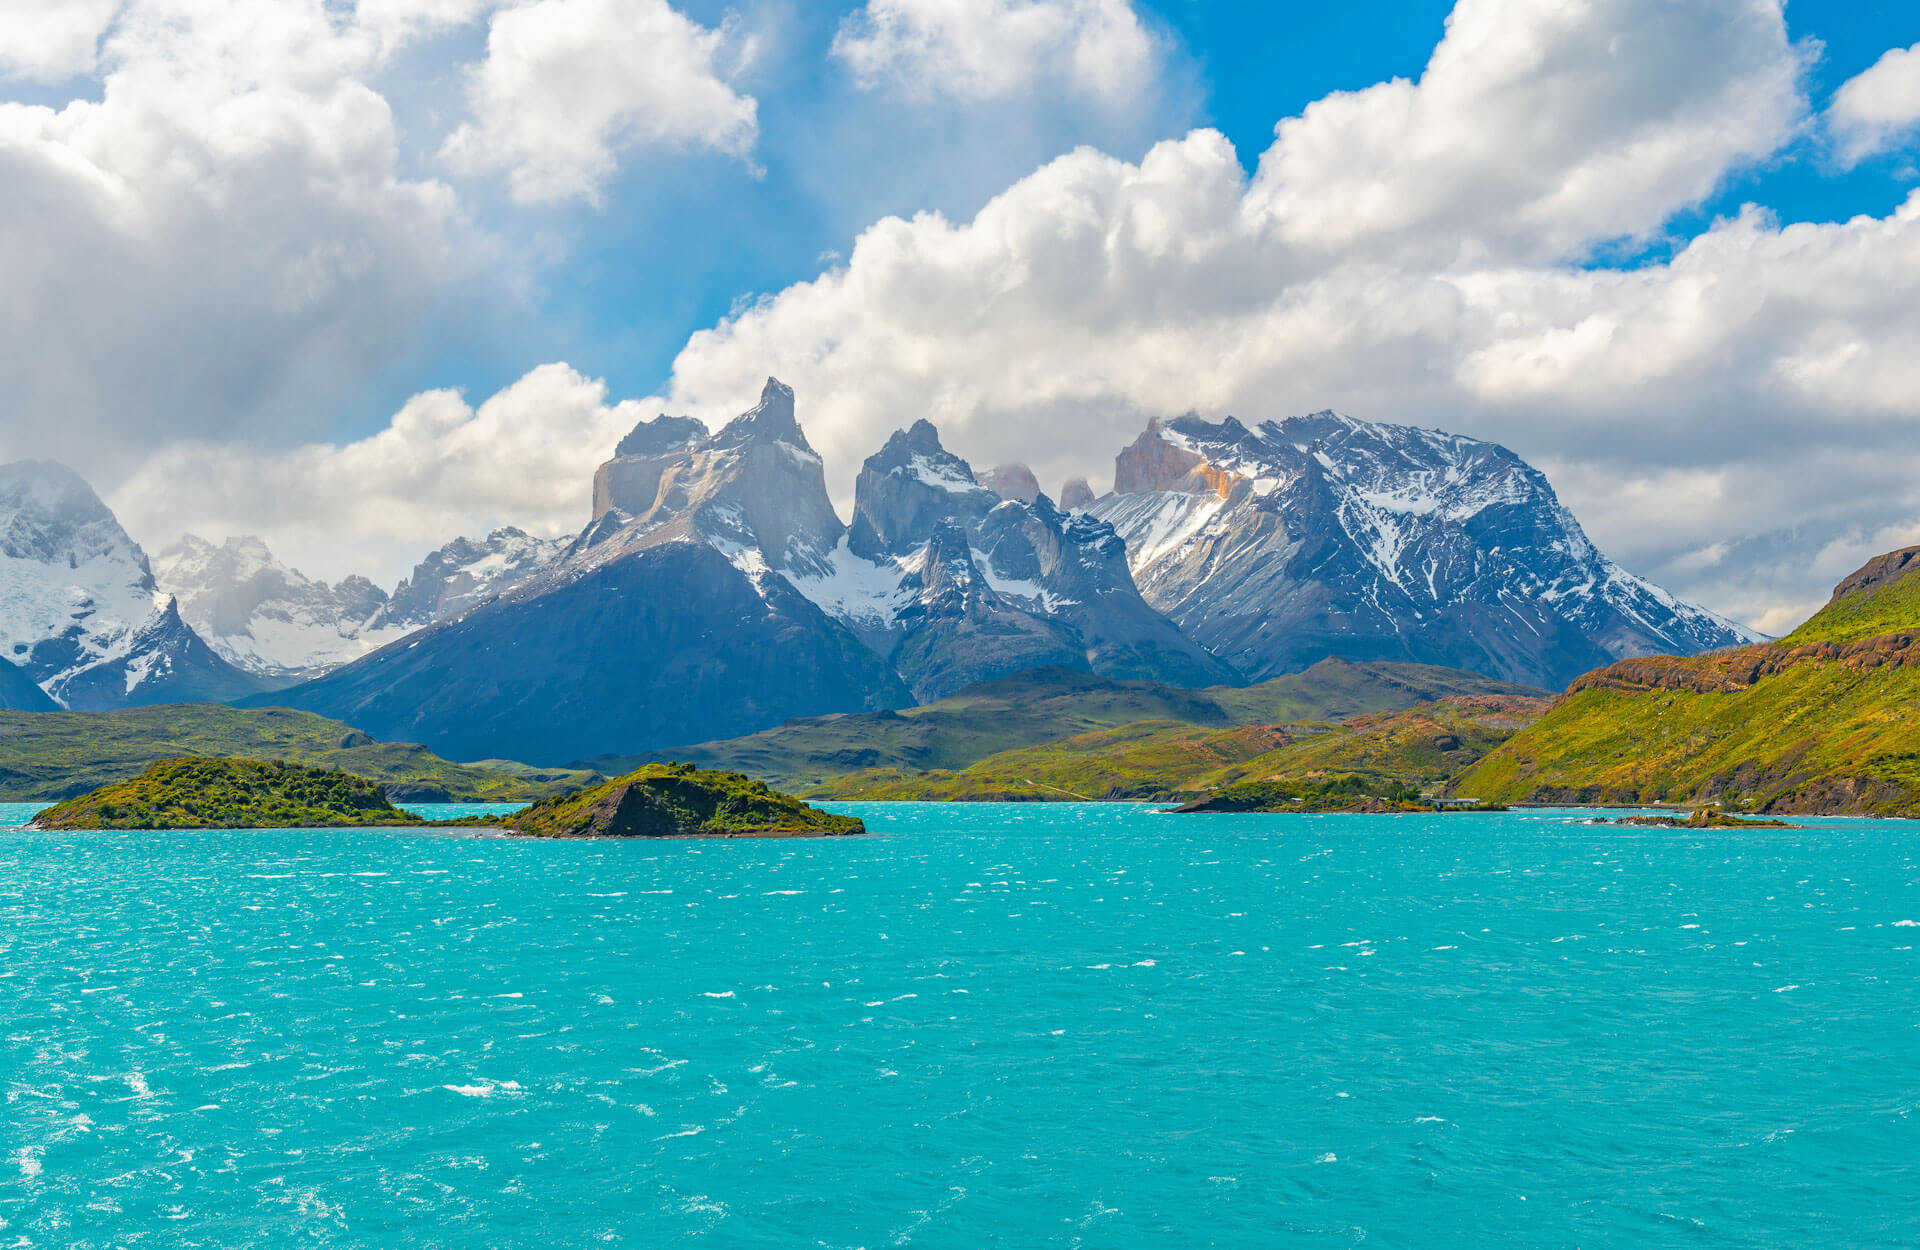 The turquoise colors of lake Pehoe with the Paine massif in the background, Torres del Paine national park, Patagonia, Chile.